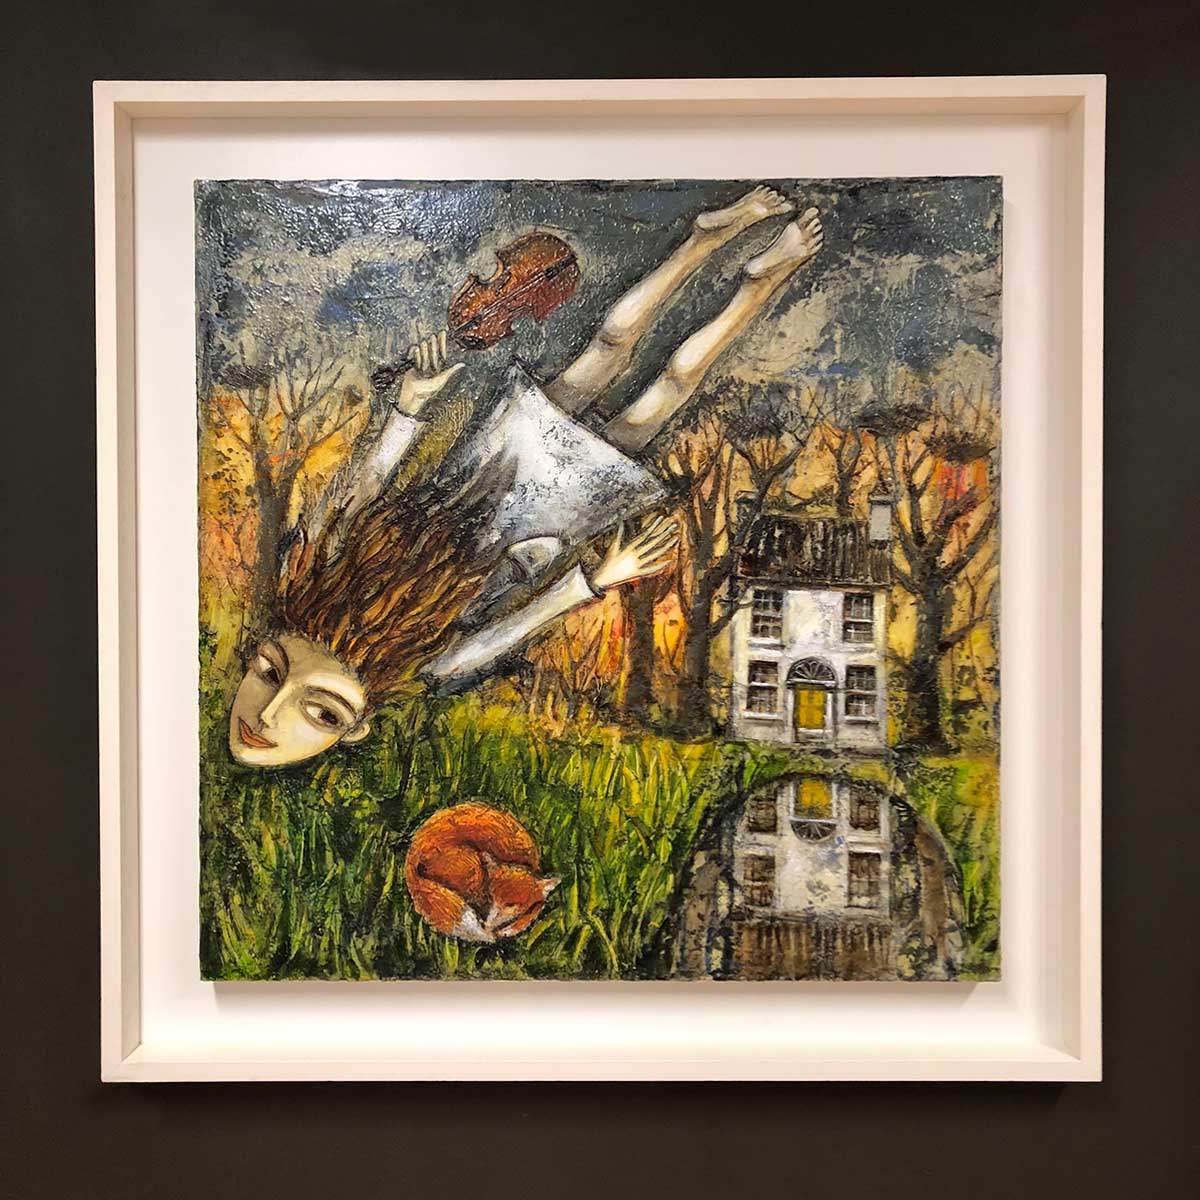 Girl holding a violin flying as in a dream over a landscape with a country house and a lake. Sun is almost rising and a fox is curled up asleep. Original painting in oil on canvas by Irish Ukrainian artist living in Inchicore, Dublin, Ireland. In a white wooden frame.